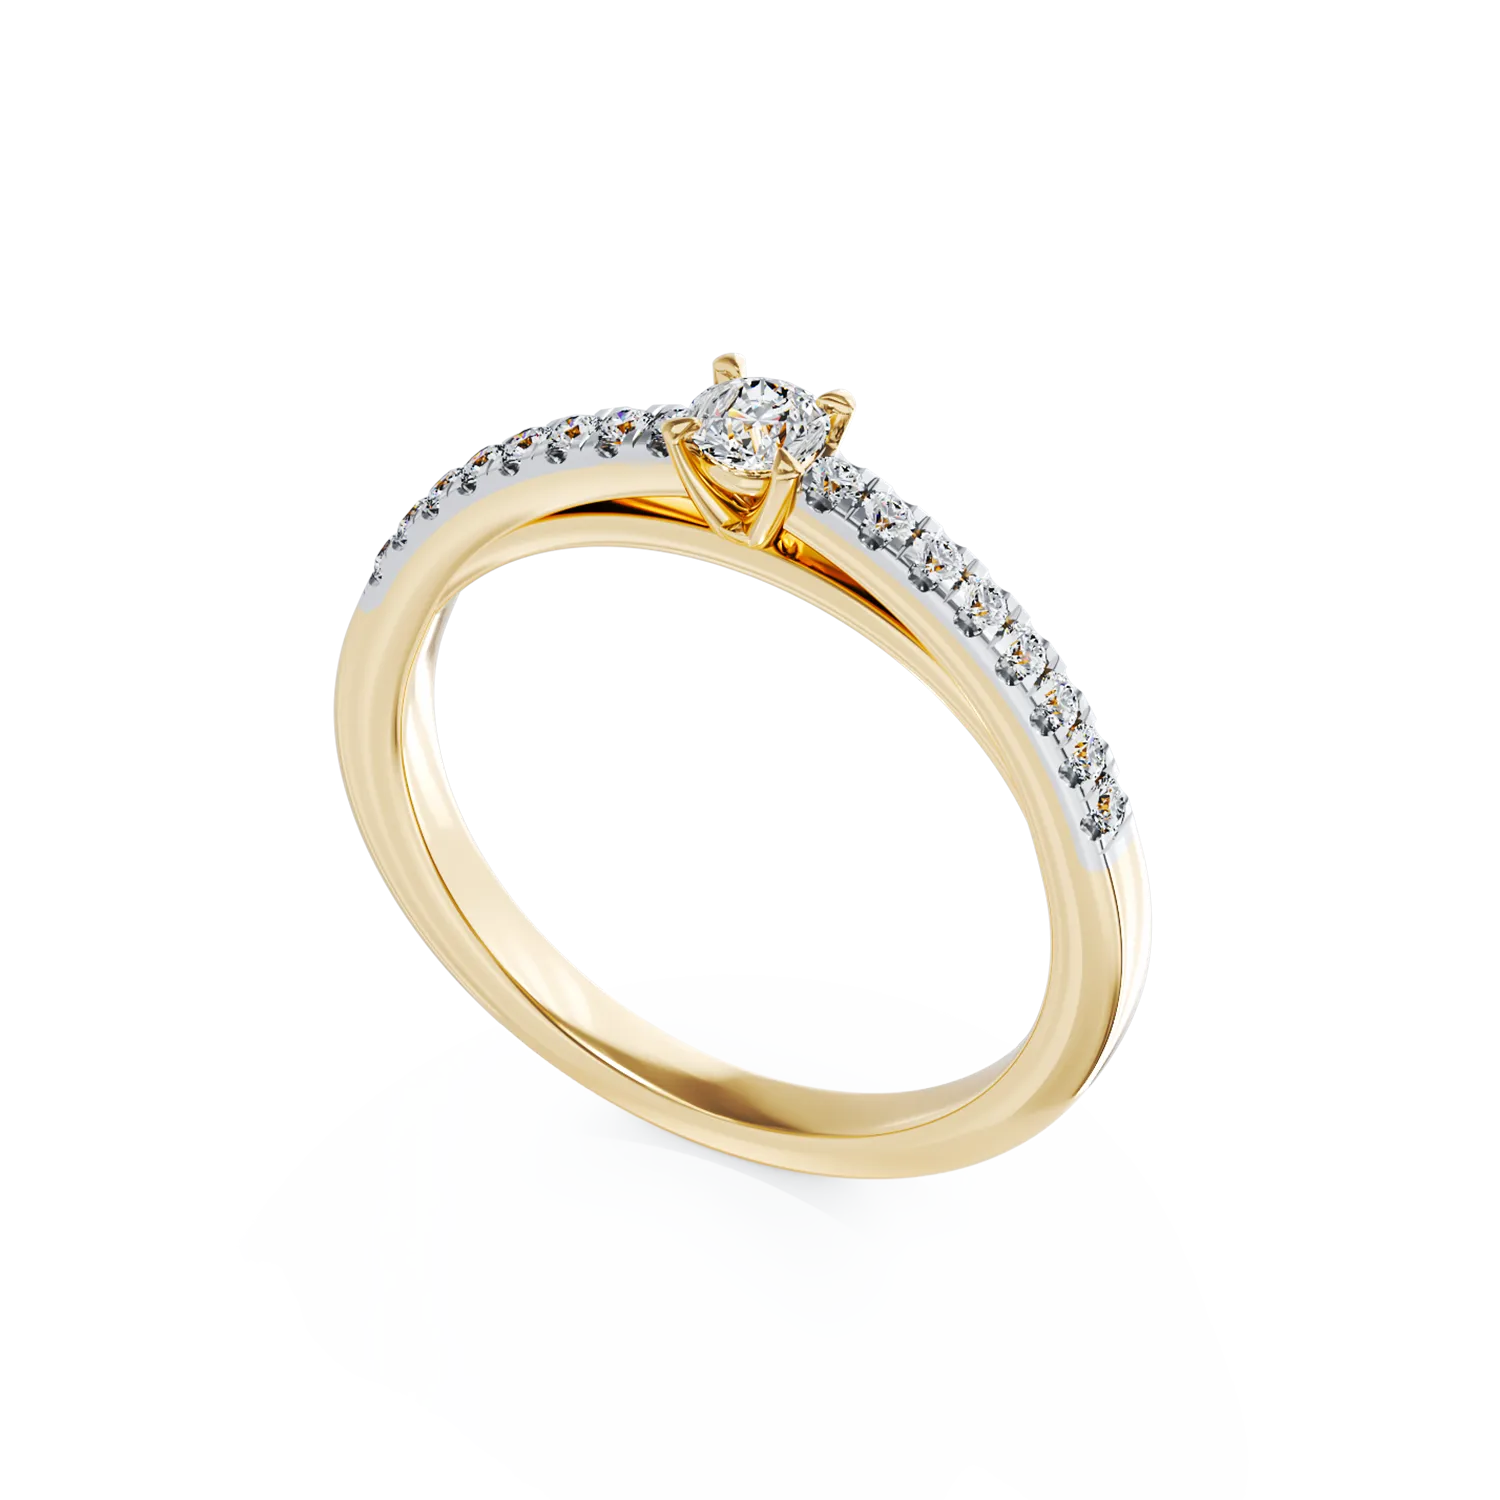 18K yellow gold engagement ring with 0.112ct diamond and 0.148ct diamonds